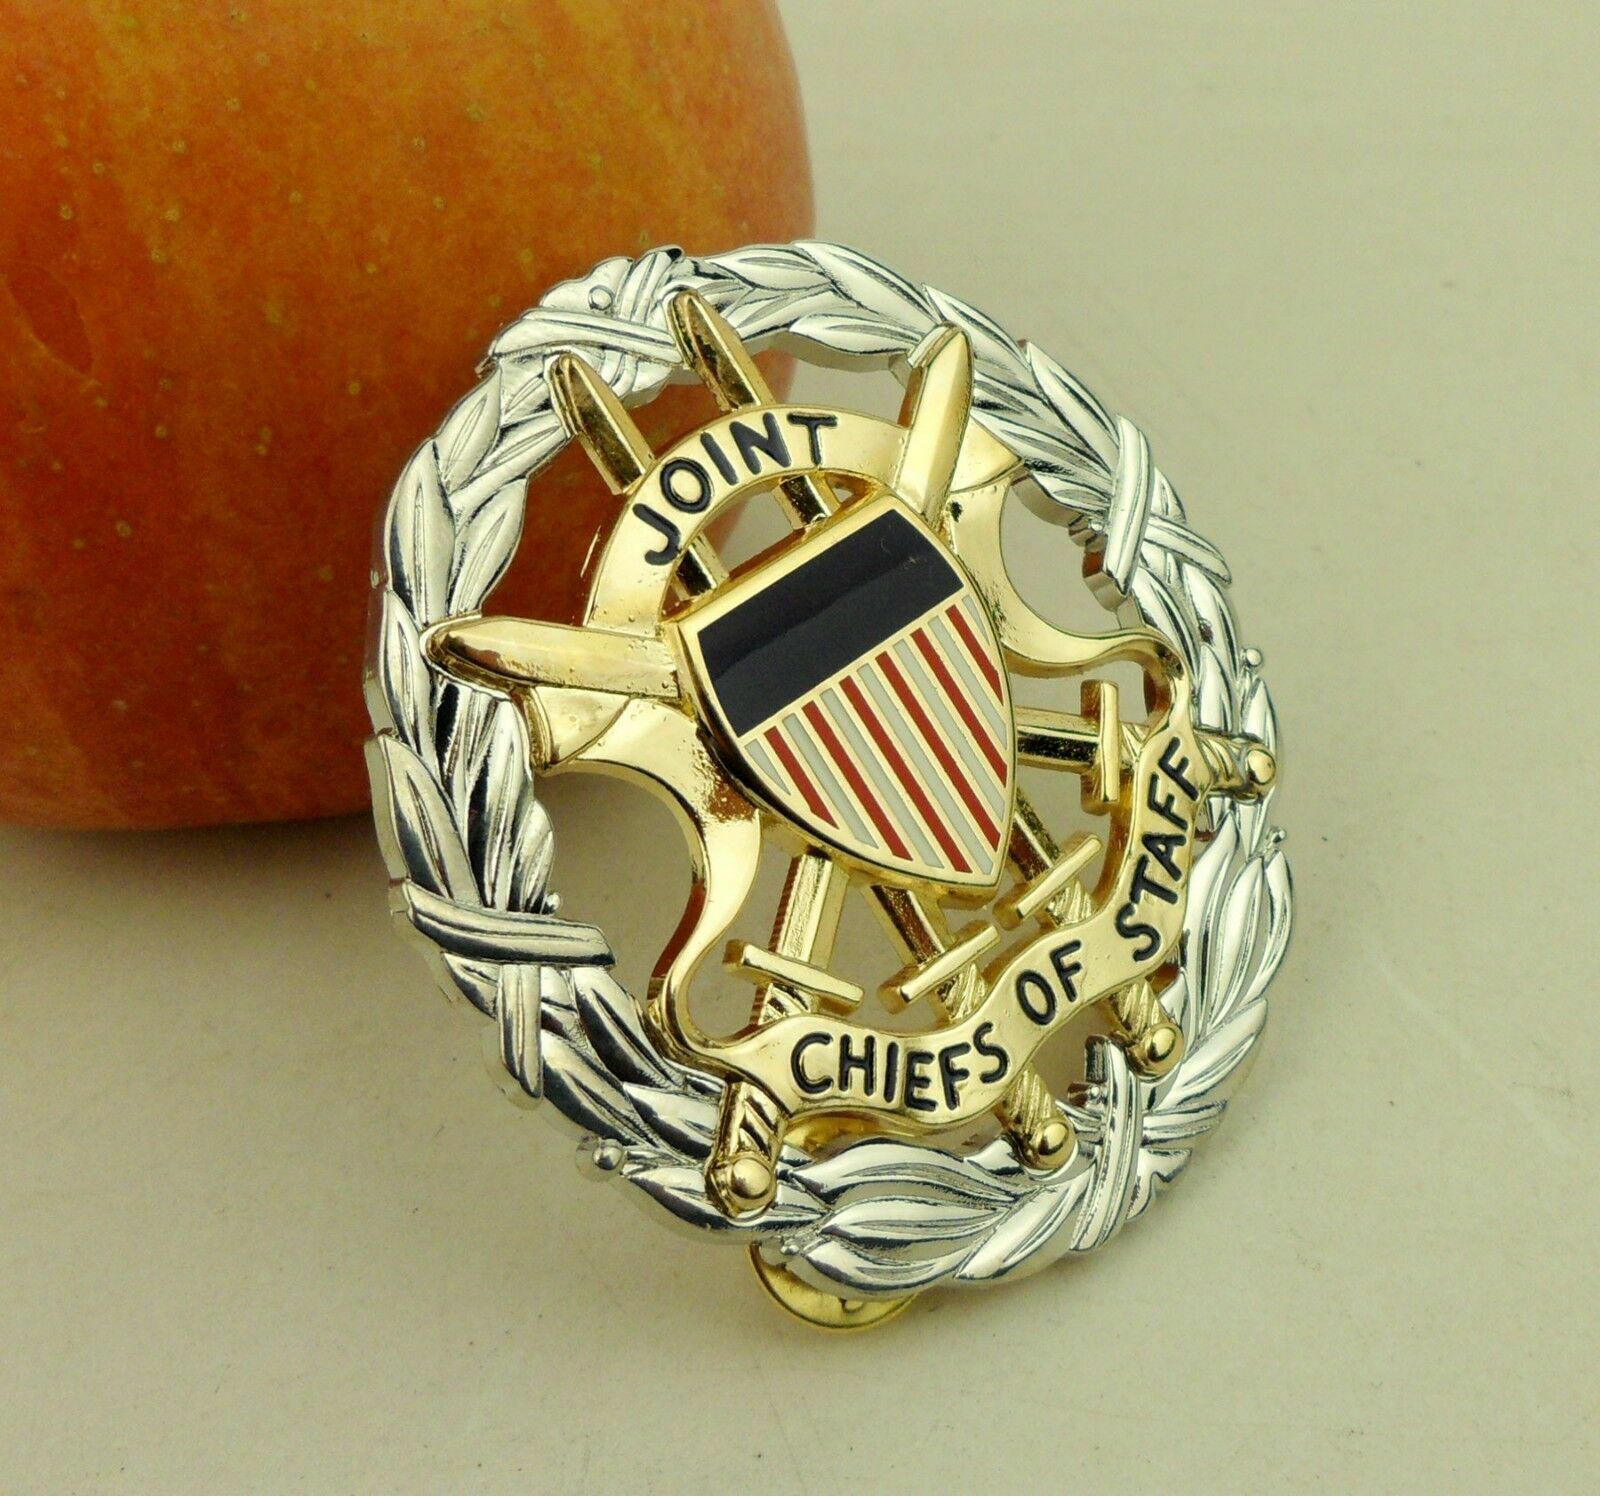 United States Joint Chiefs of Staff Identification Badge Pin US JCS METAL BADGE 